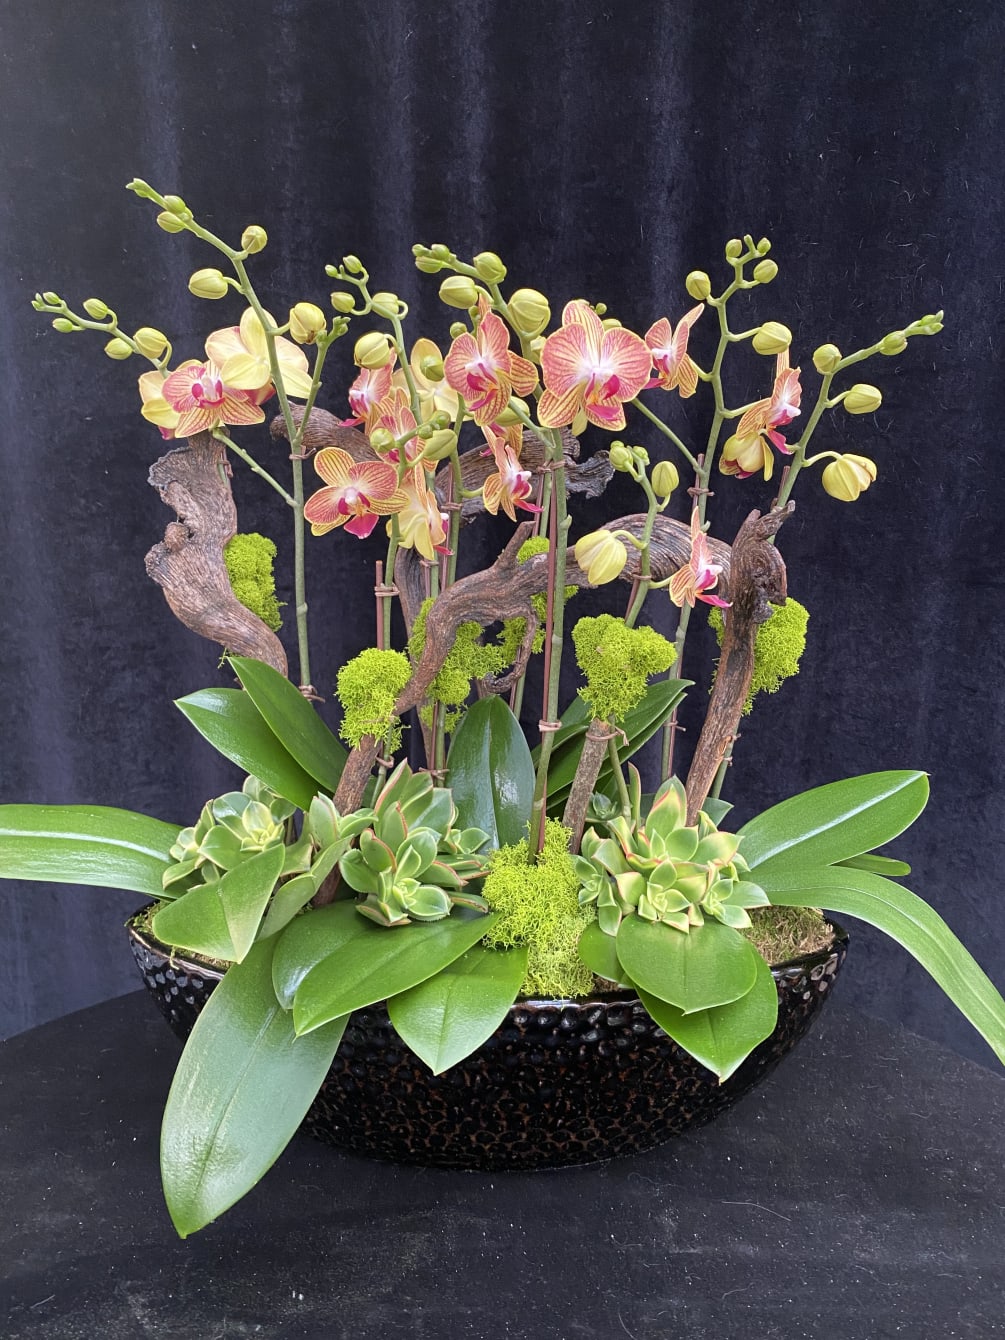 Phalaenopsis design similar to Forever Love with upgrade of bigger pot and